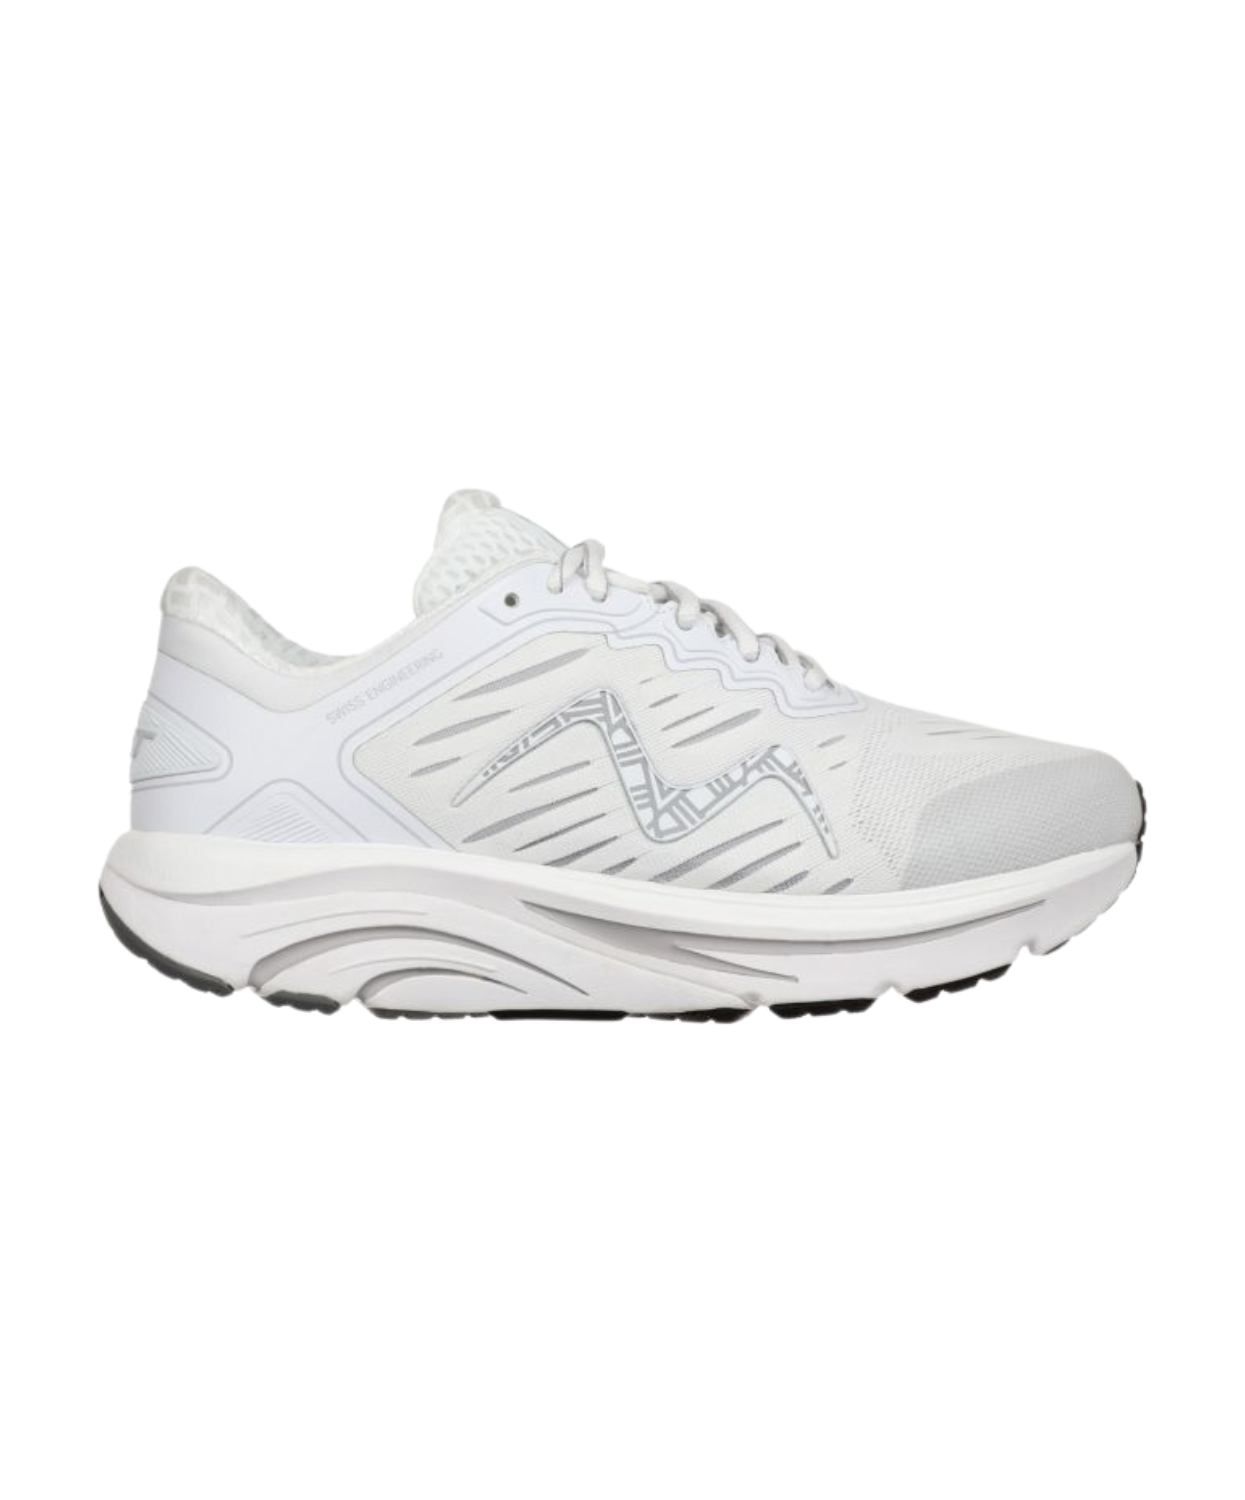 MBT MBT-2000 II Lace Up White Womens Sneakers